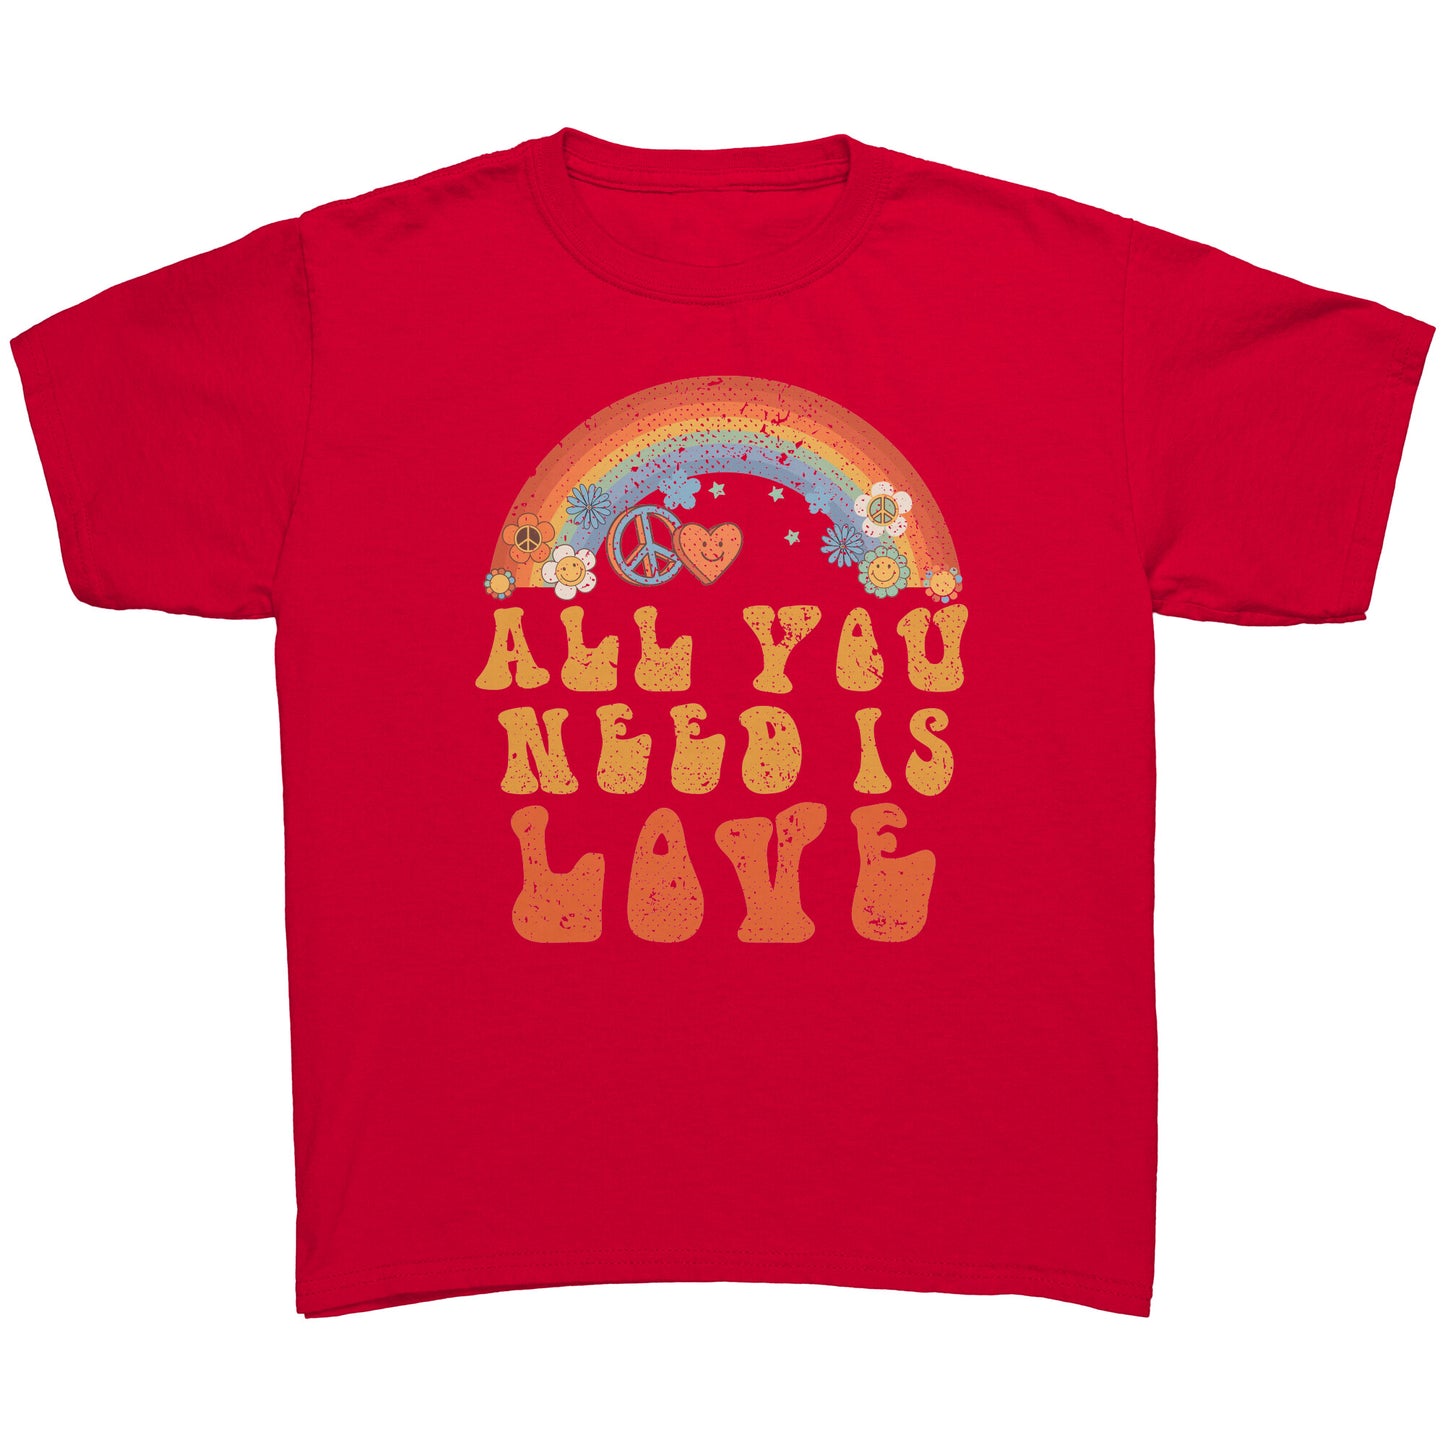 All You Need Is Love Retro Youth Shirt